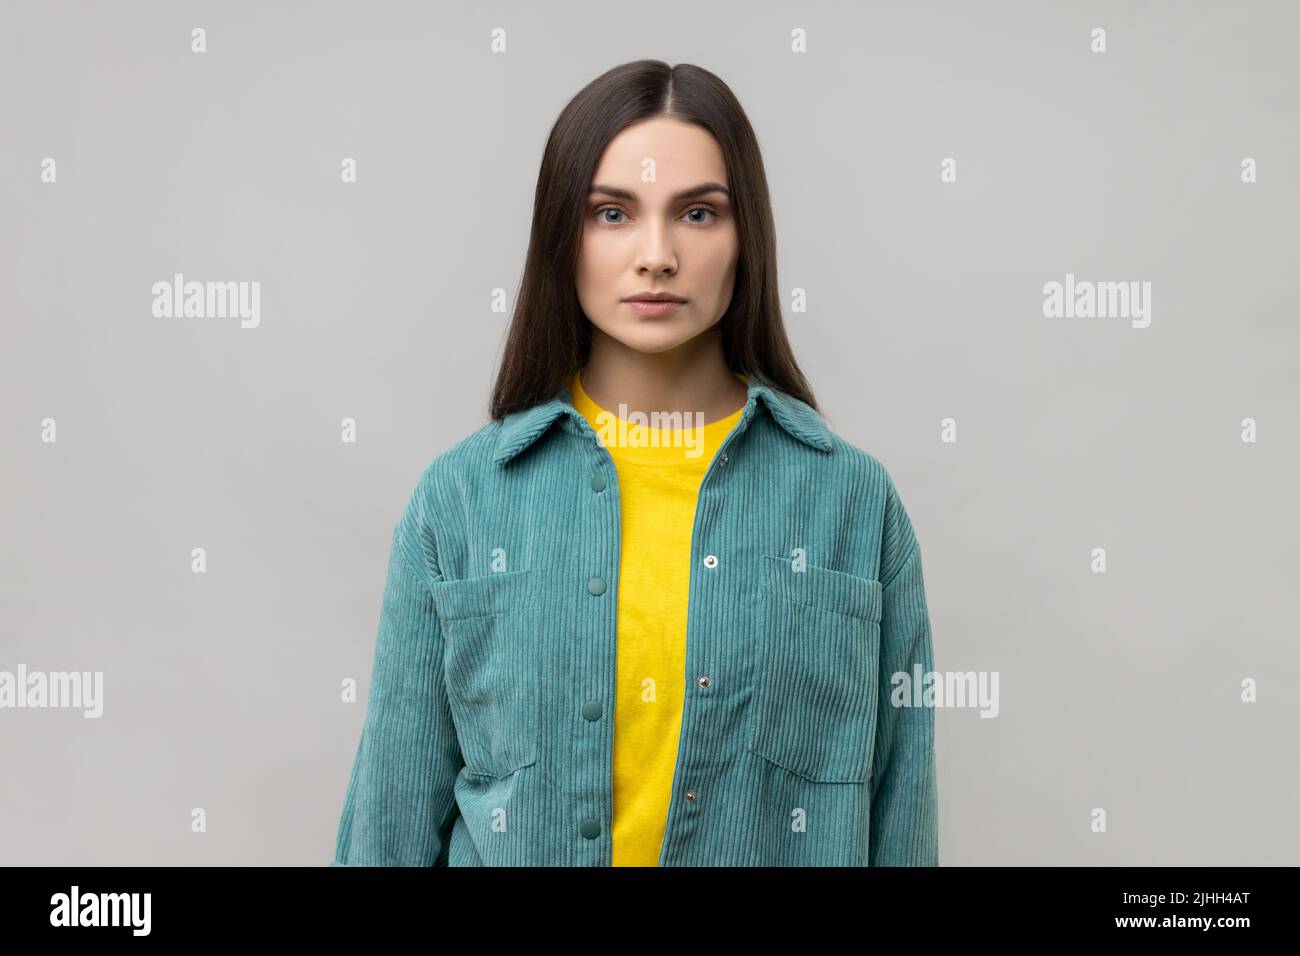 Portrait of strict bossy woman looking at camera, feels confident focused self-assured, expressing seriousness, wearing casual style jacket. Indoor studio shot isolated on gray background. Stock Photo